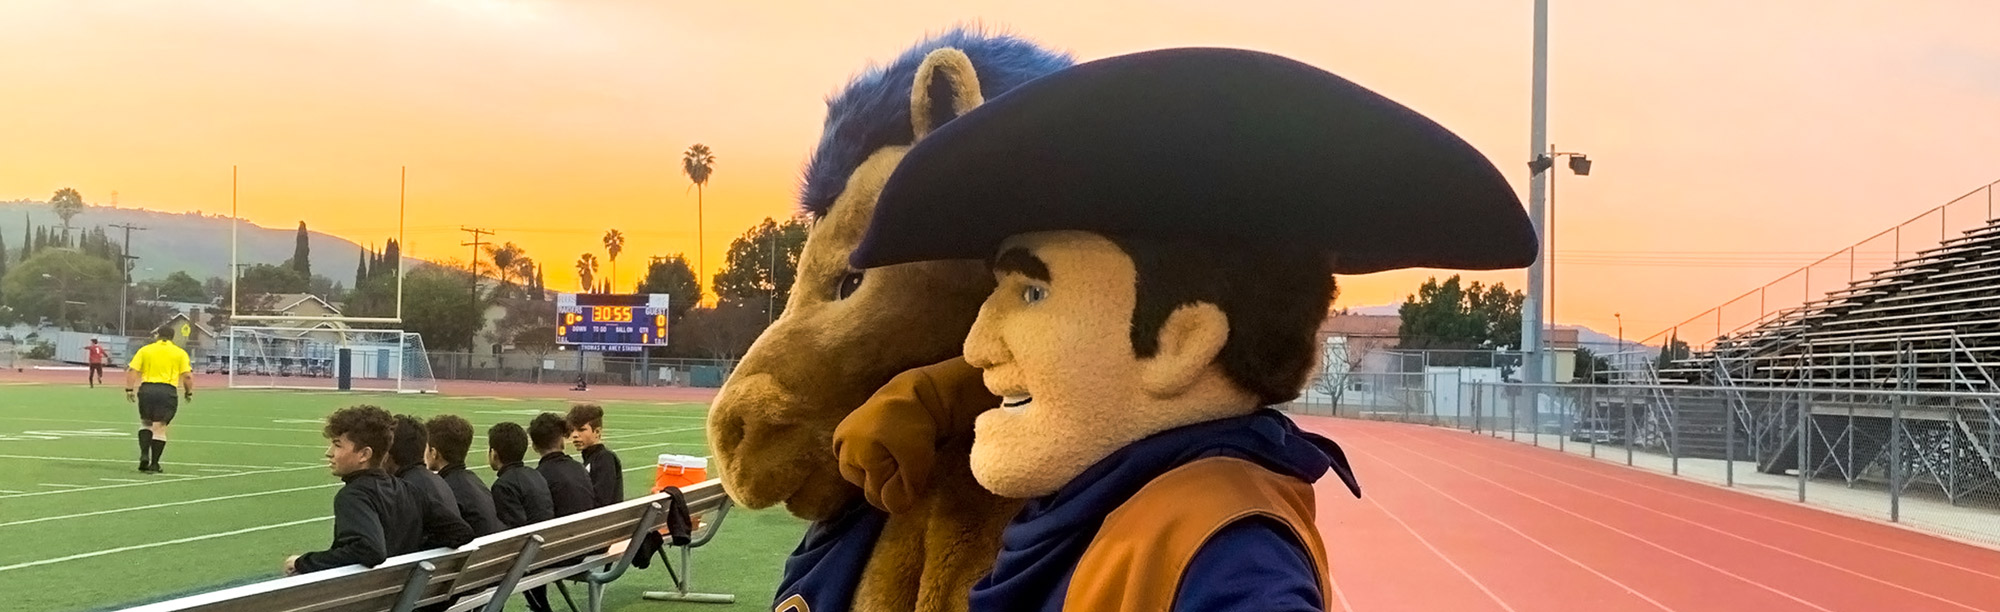 Rowland High School mascots Johnny and Storm